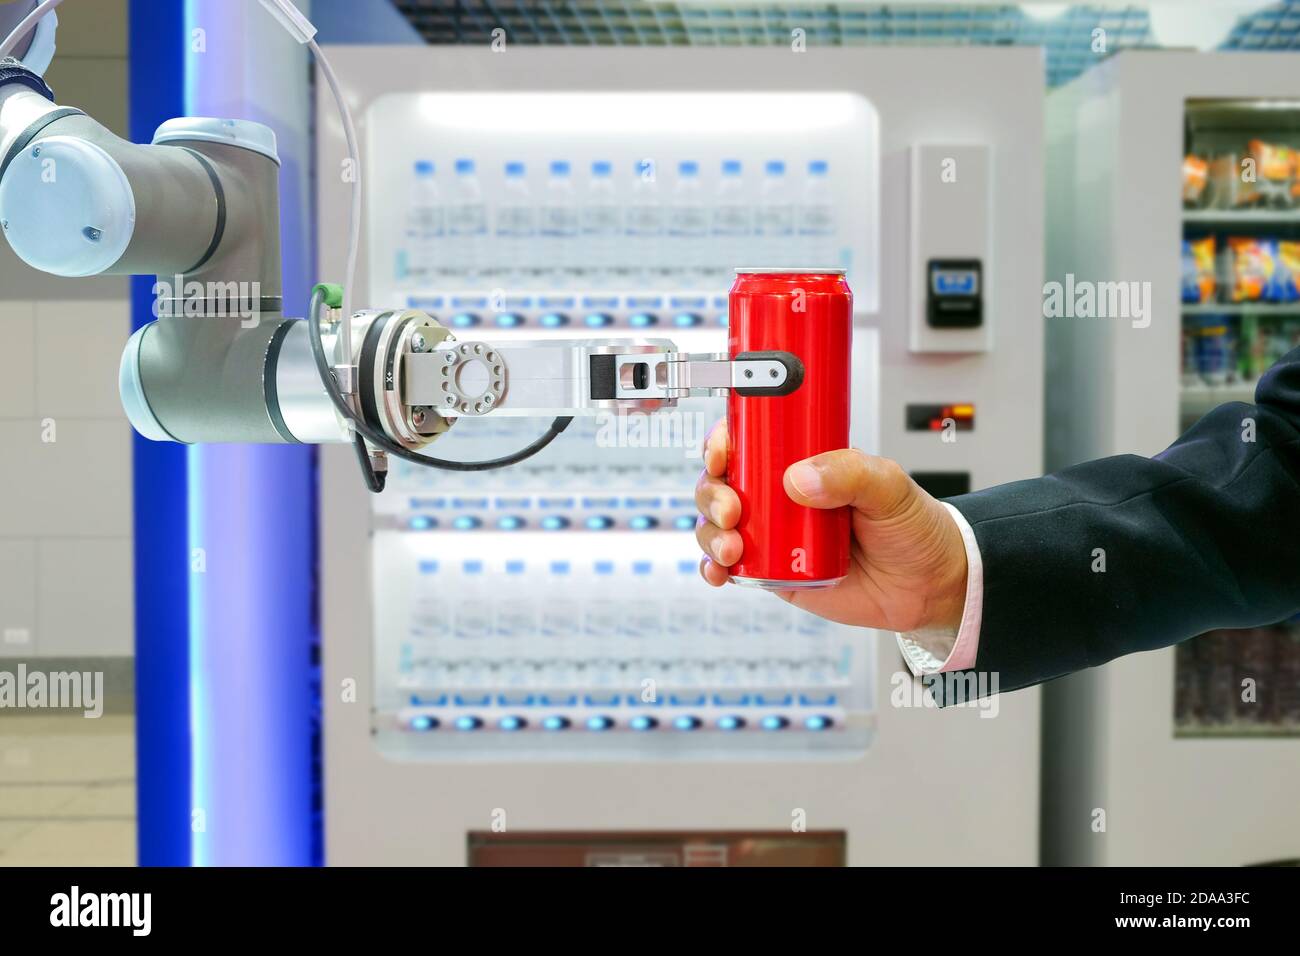 Close-up industrial robotic gripping red soda can for sending to businessman via smart automatic beverage dispenser machine service Stock Photo